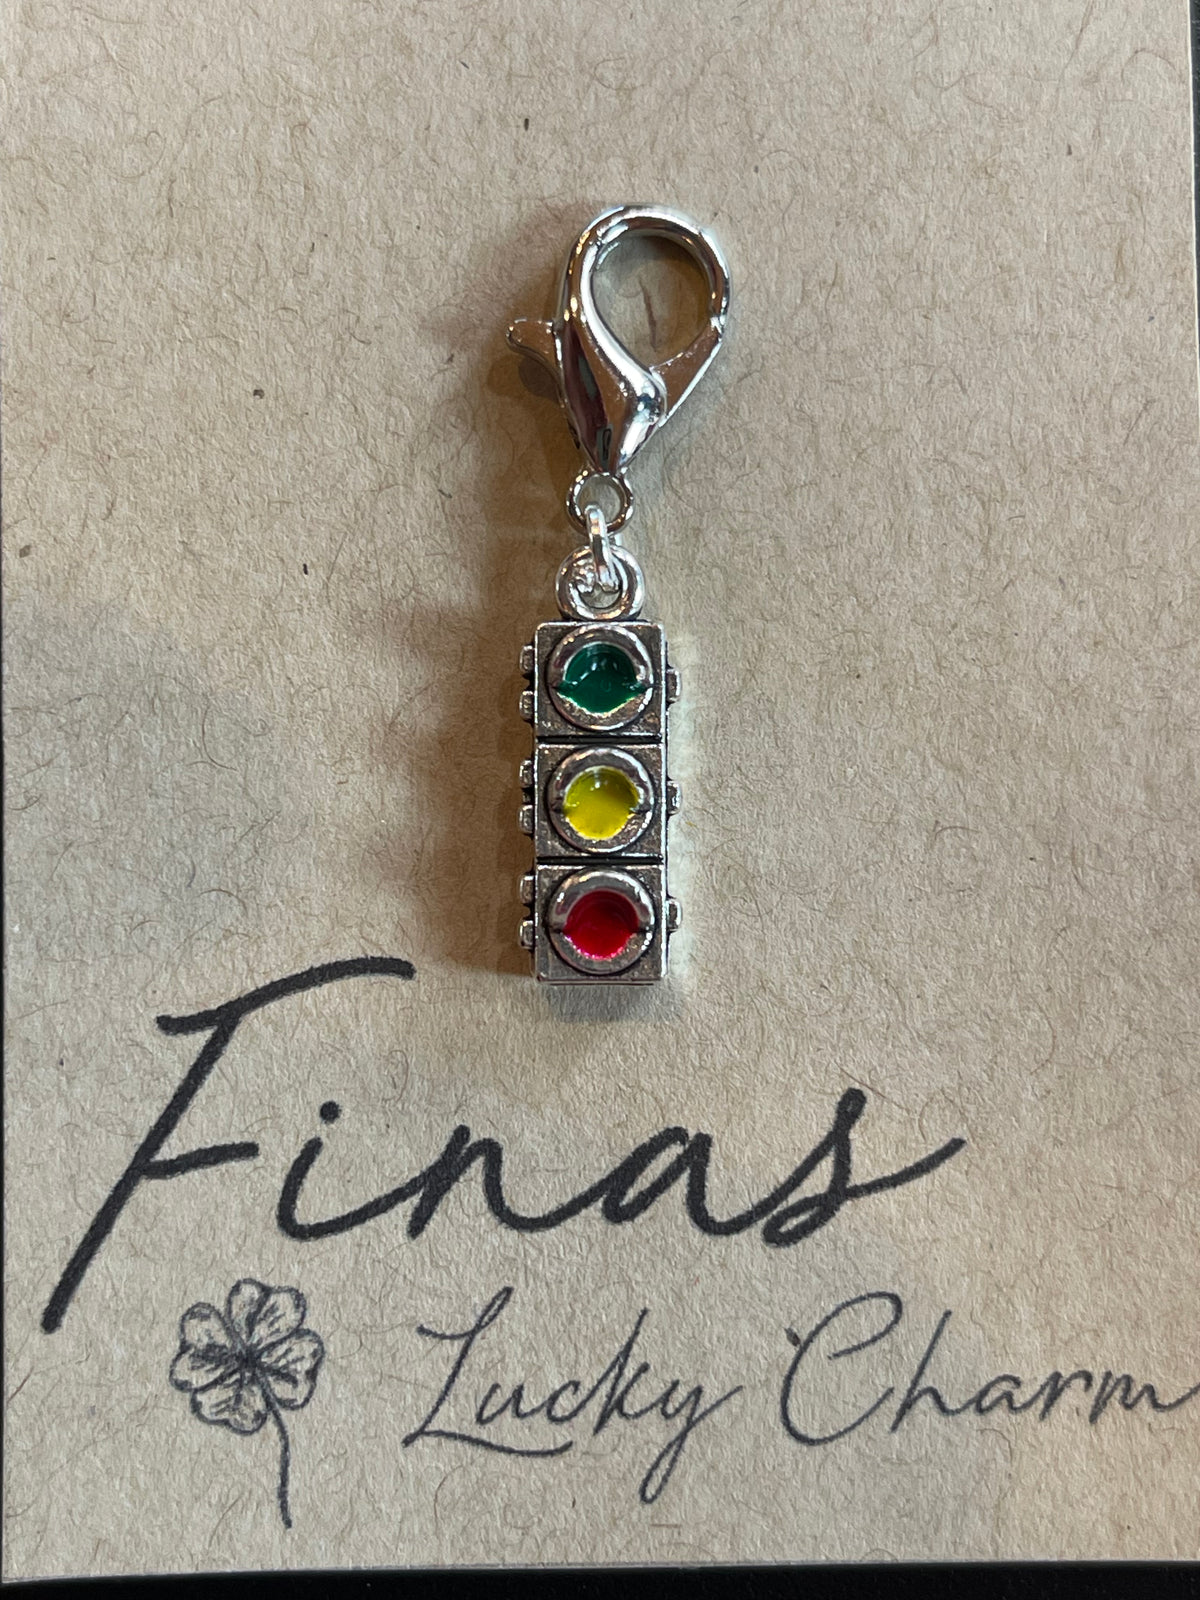 Fina's Lucky Charm charm Stop Light Fina's Lucky Charm equestrian team apparel online tack store mobile tack store custom farm apparel custom show stable clothing equestrian lifestyle horse show clothing riding clothes horses equestrian tack store